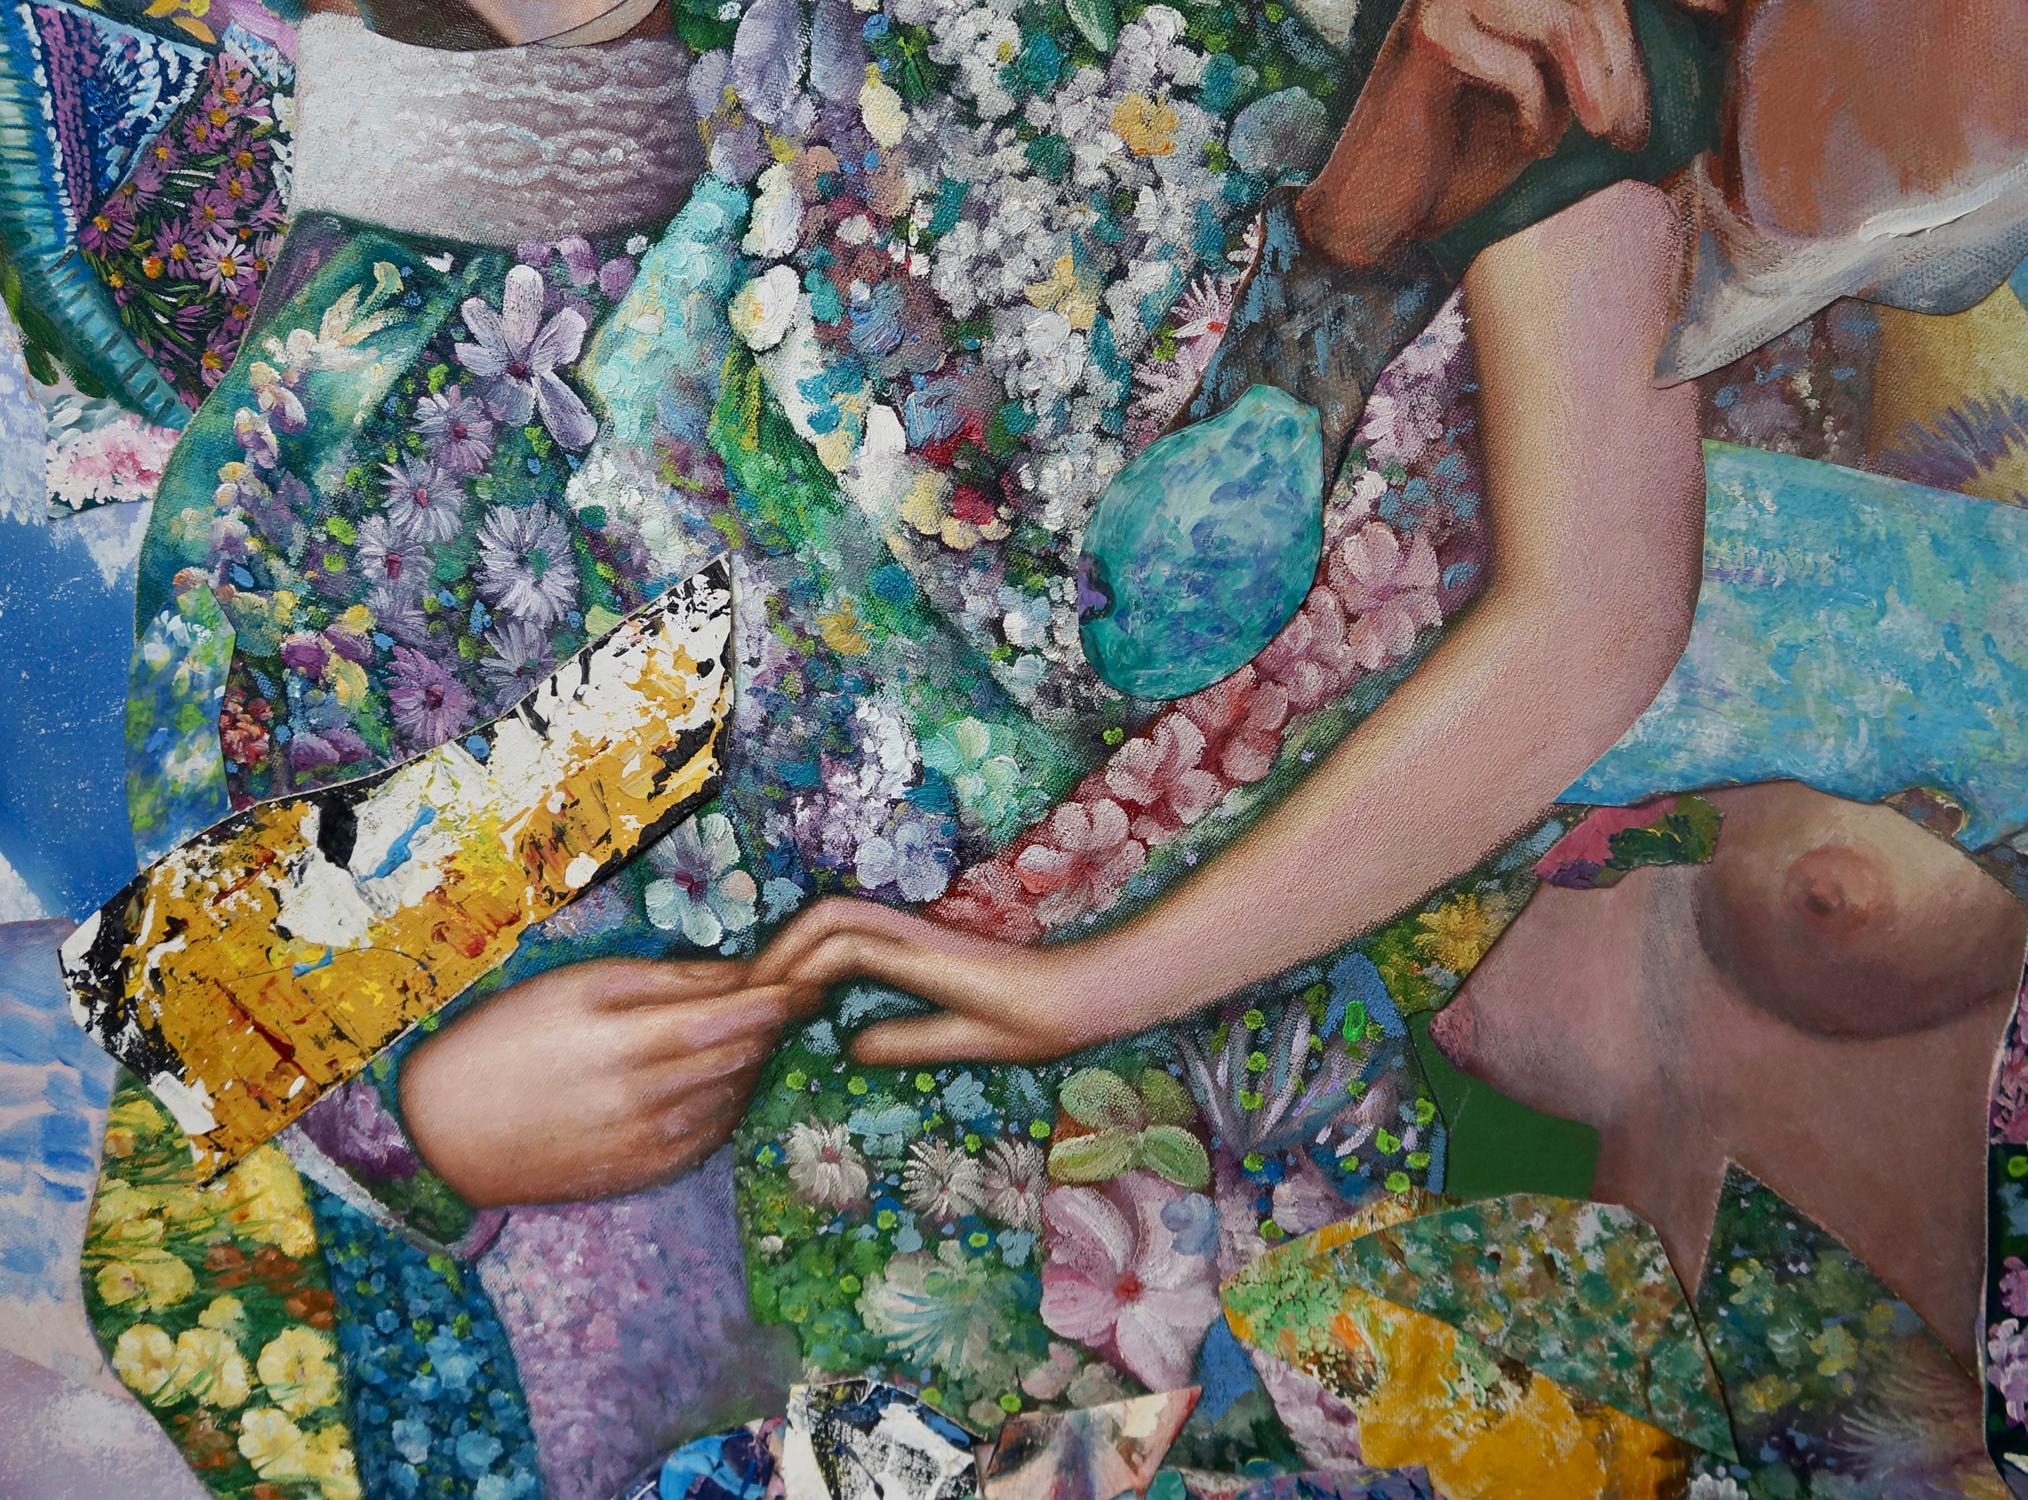 John Baker’s “Mountain Embrace” is an acrylic painting with collage on canvas 67 x 46 x 1.5 inches in pinks, blues, greens and yellows. The cluster of intertwined, nearly life size figures floats apparition-like and weightless in a stratospheric